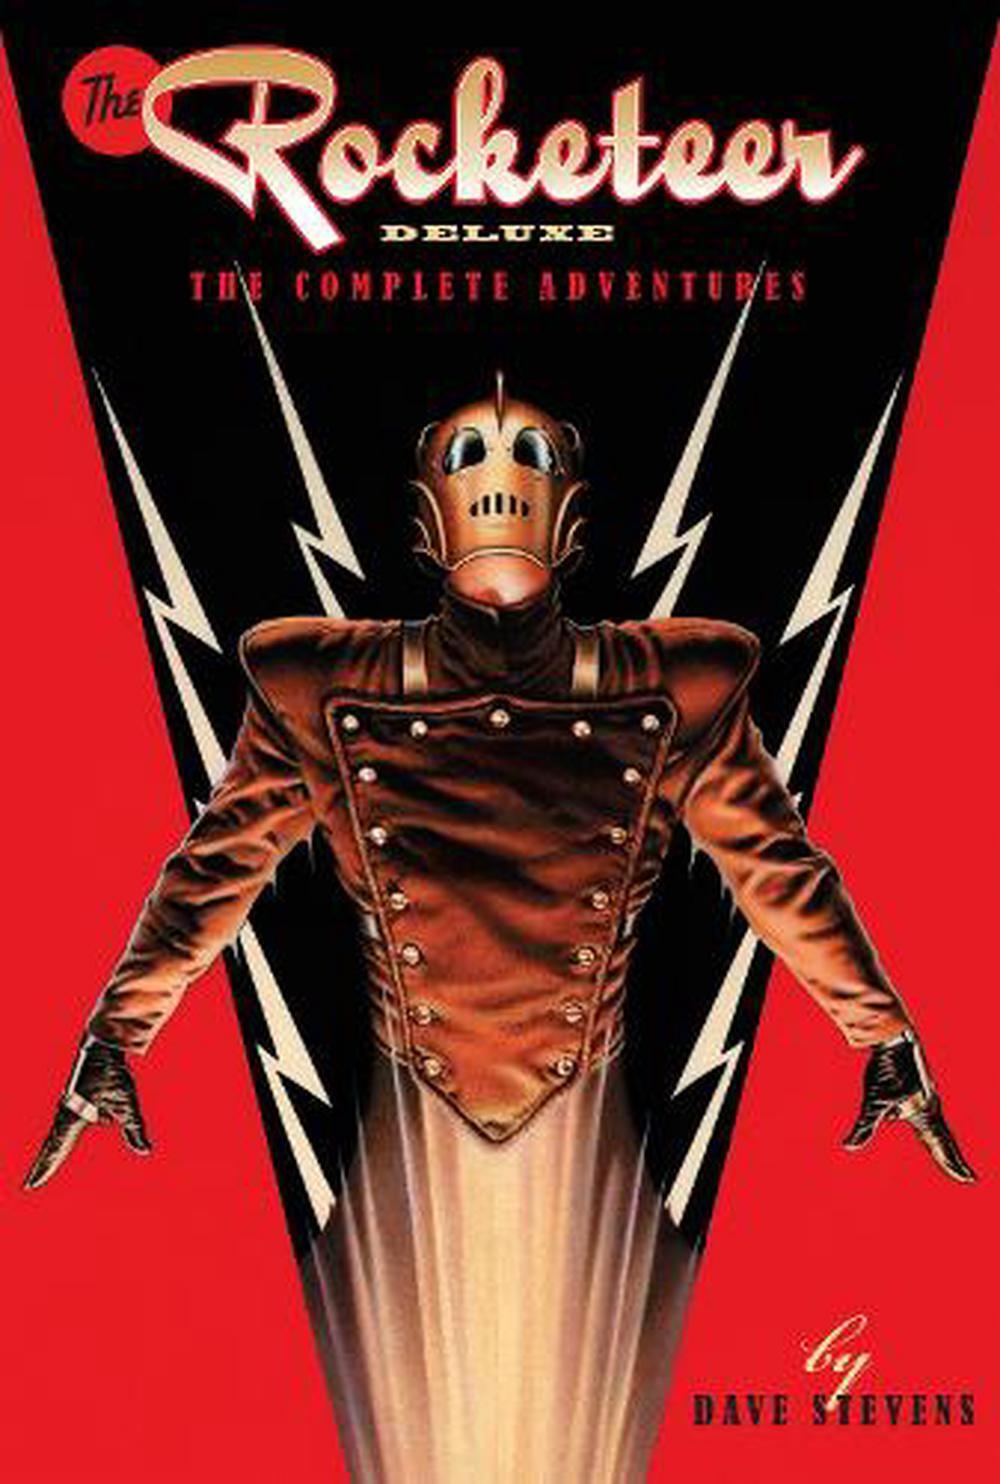 The Rocketeer: The Complete Adventures Deluxe Edition by Dave Stevens (English) 